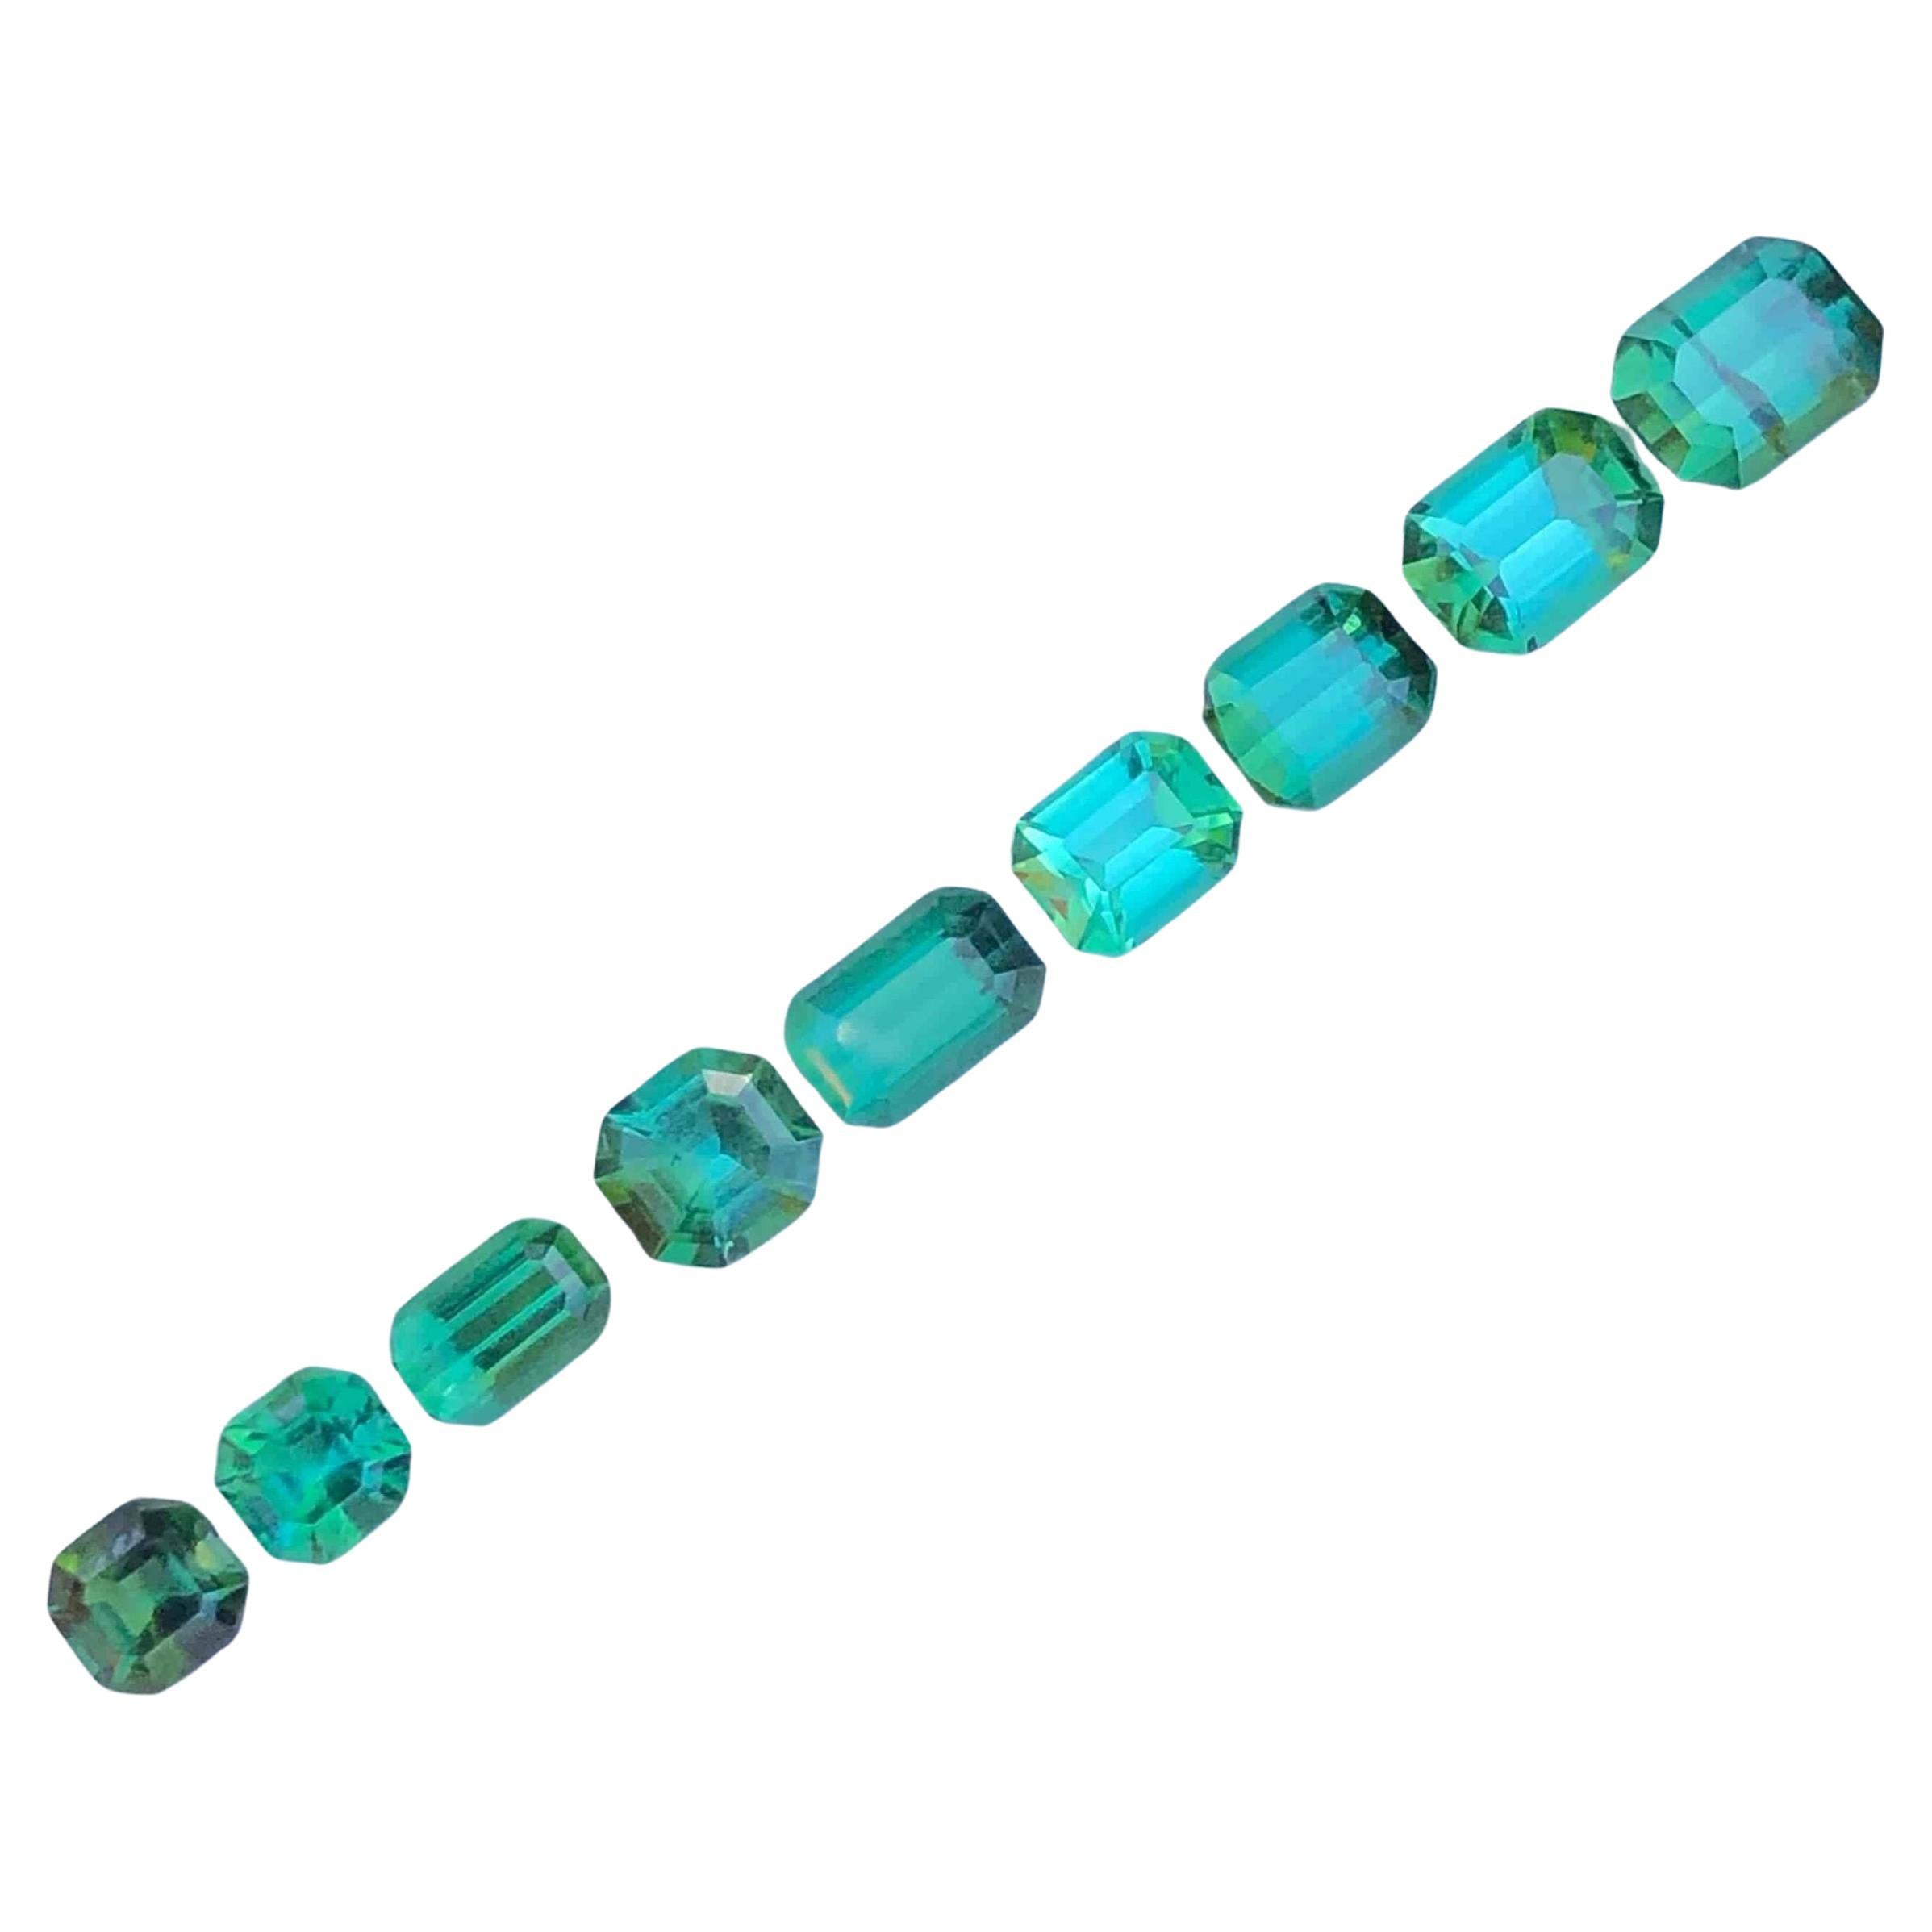 Mint Green Tourmaline Gemstones Lot Natural Loose Tourmaline from Afghanistan For Sale